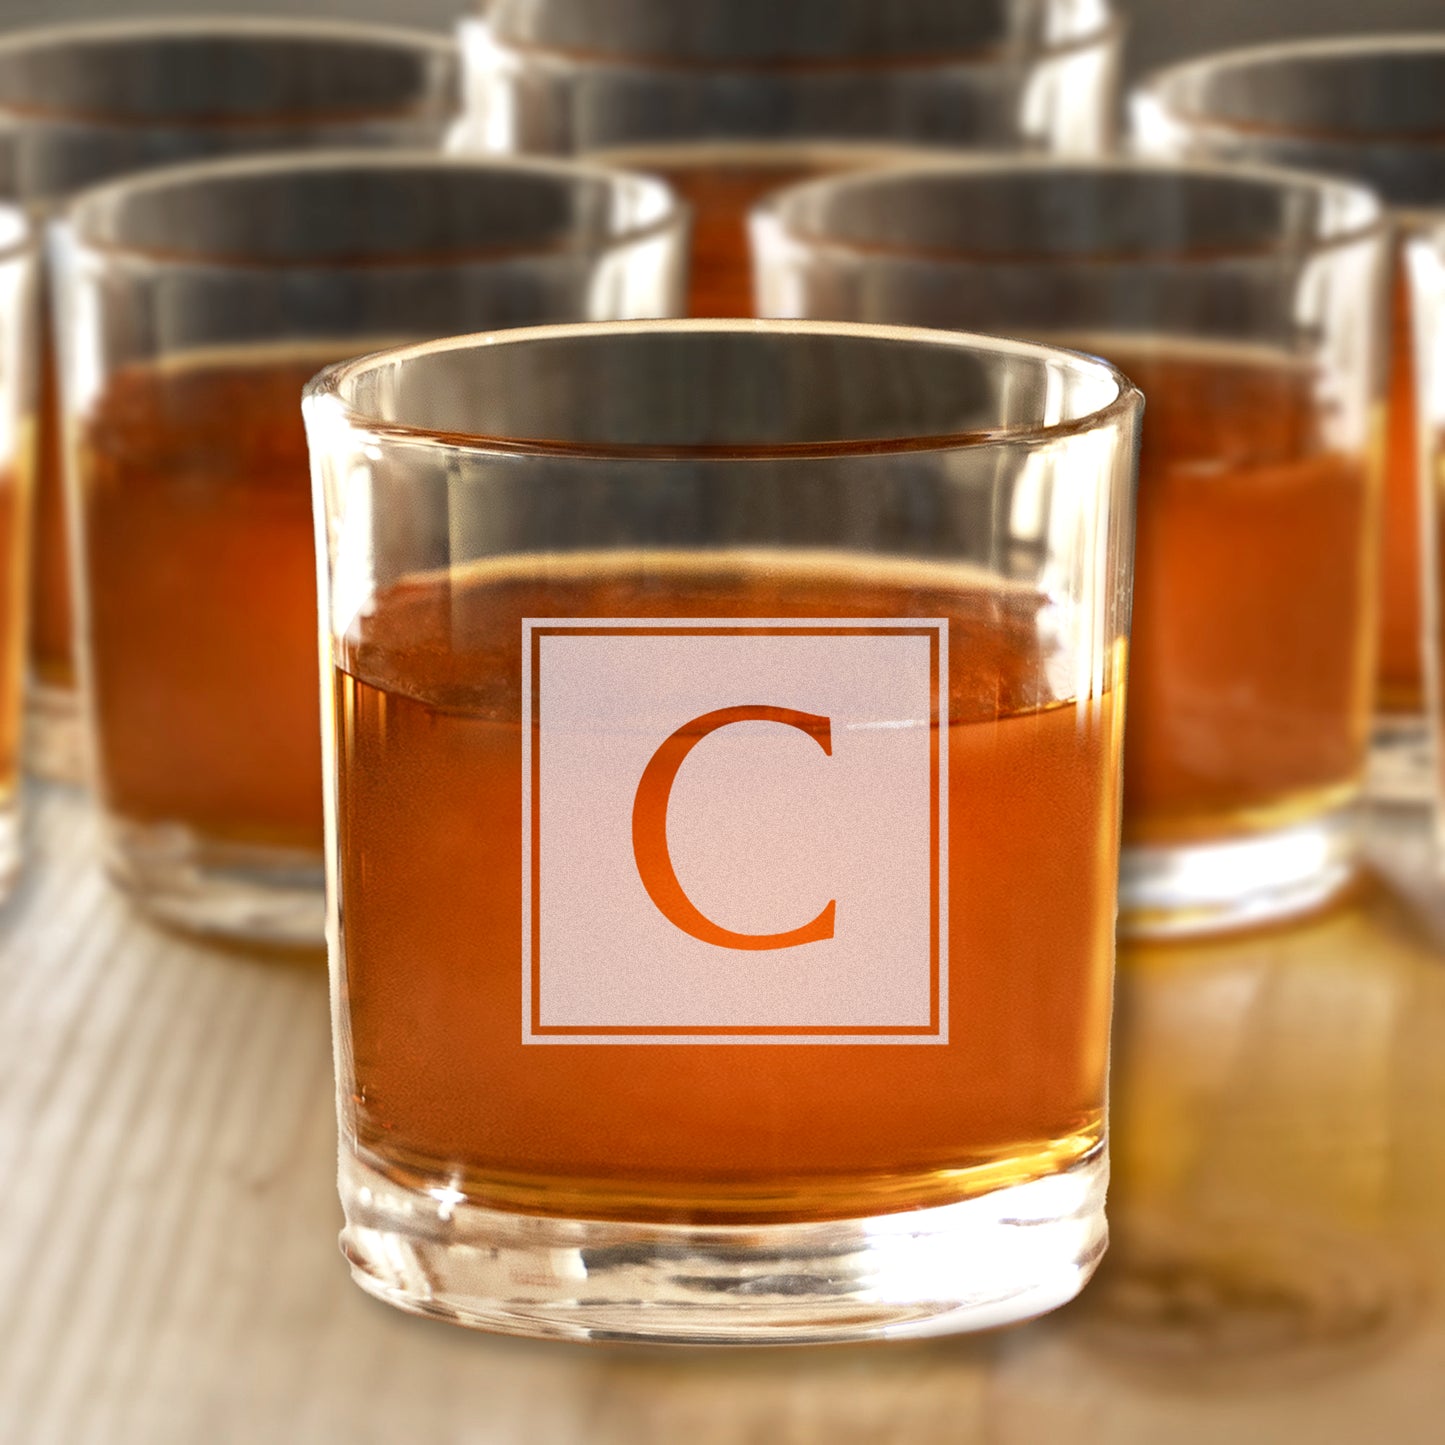 Set of Personalized Laser Engraved Whiskey Glasses